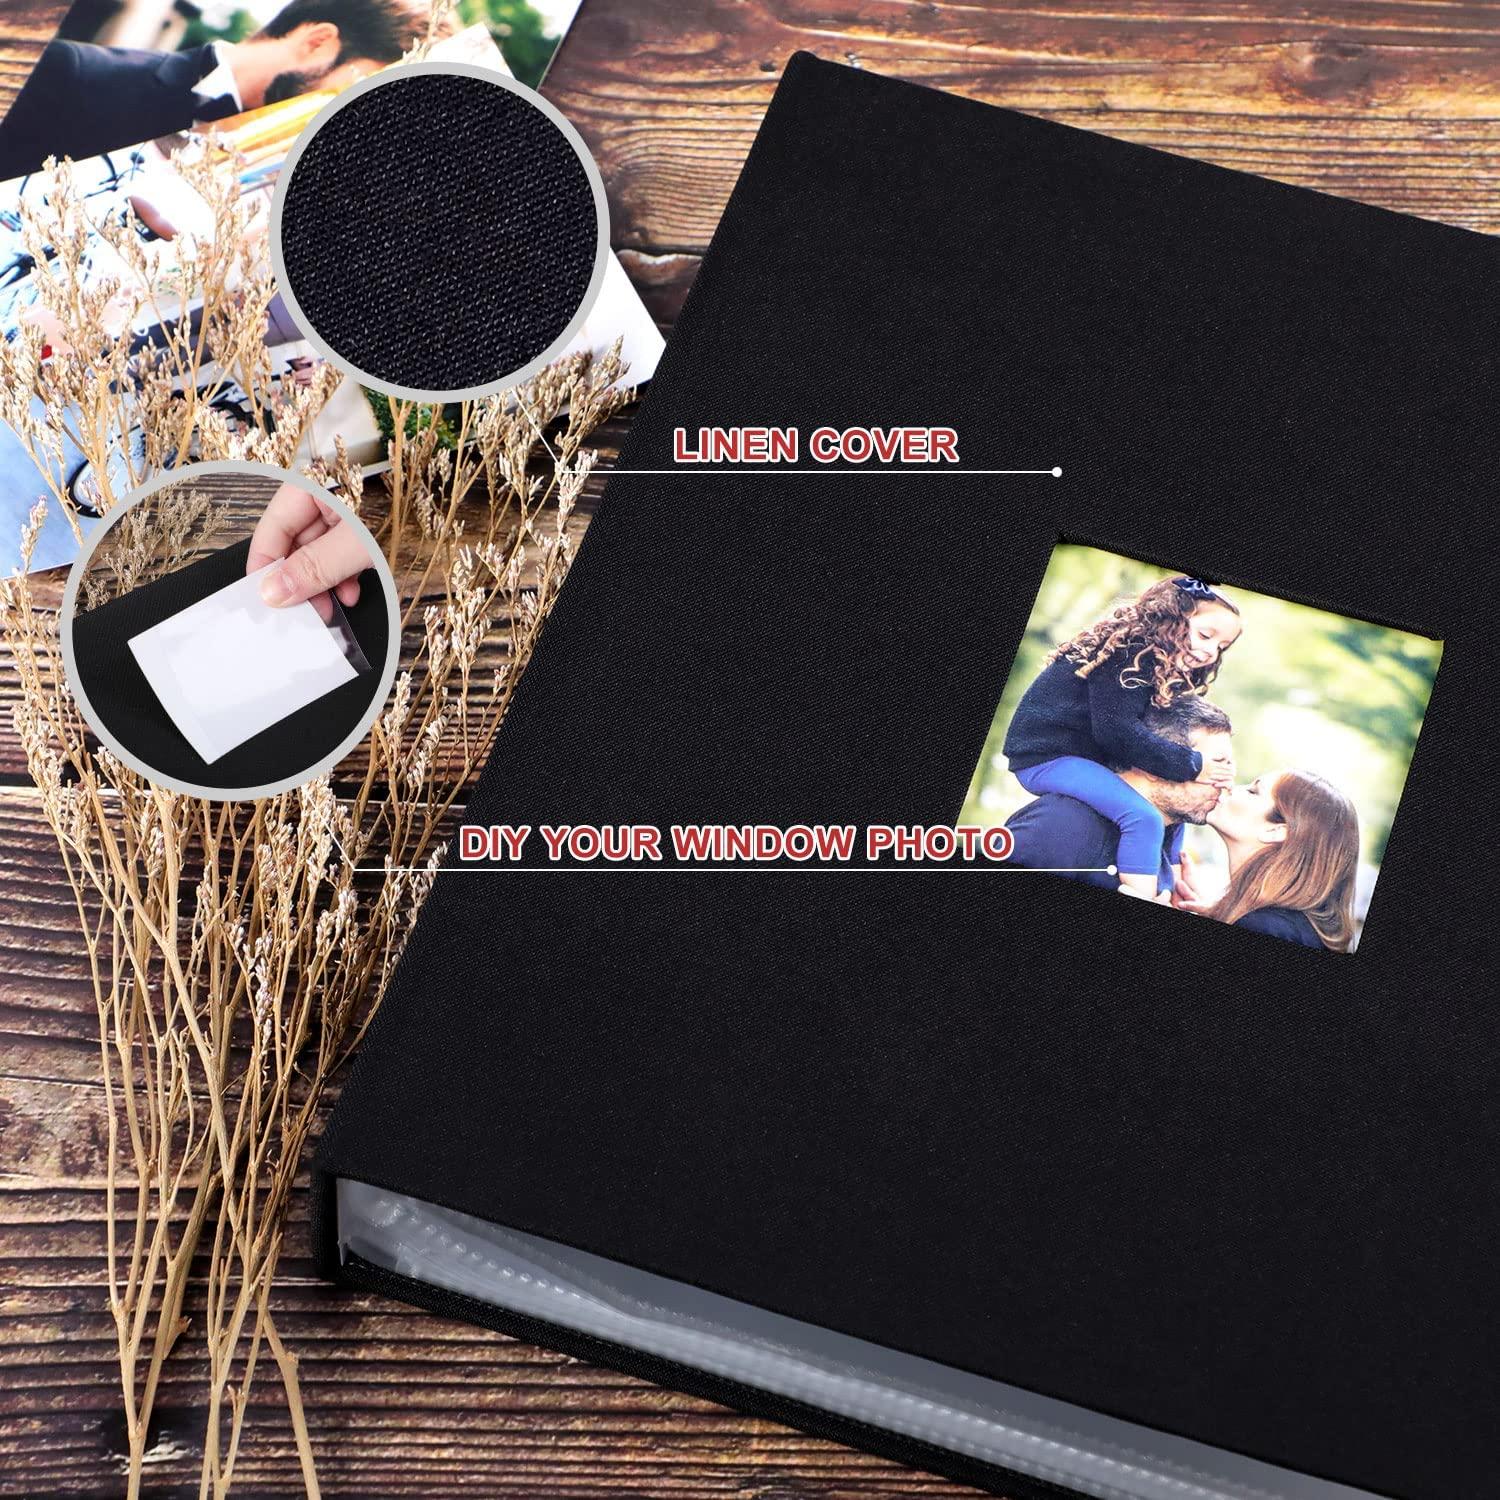 Lanpn Photo Album 5x7 2 Packs, Linen Cover Small Acid Free Top Load Pocket  Photo Book Picture Album Holds 52 Vertical Only 5 x 7 Picture (Black)